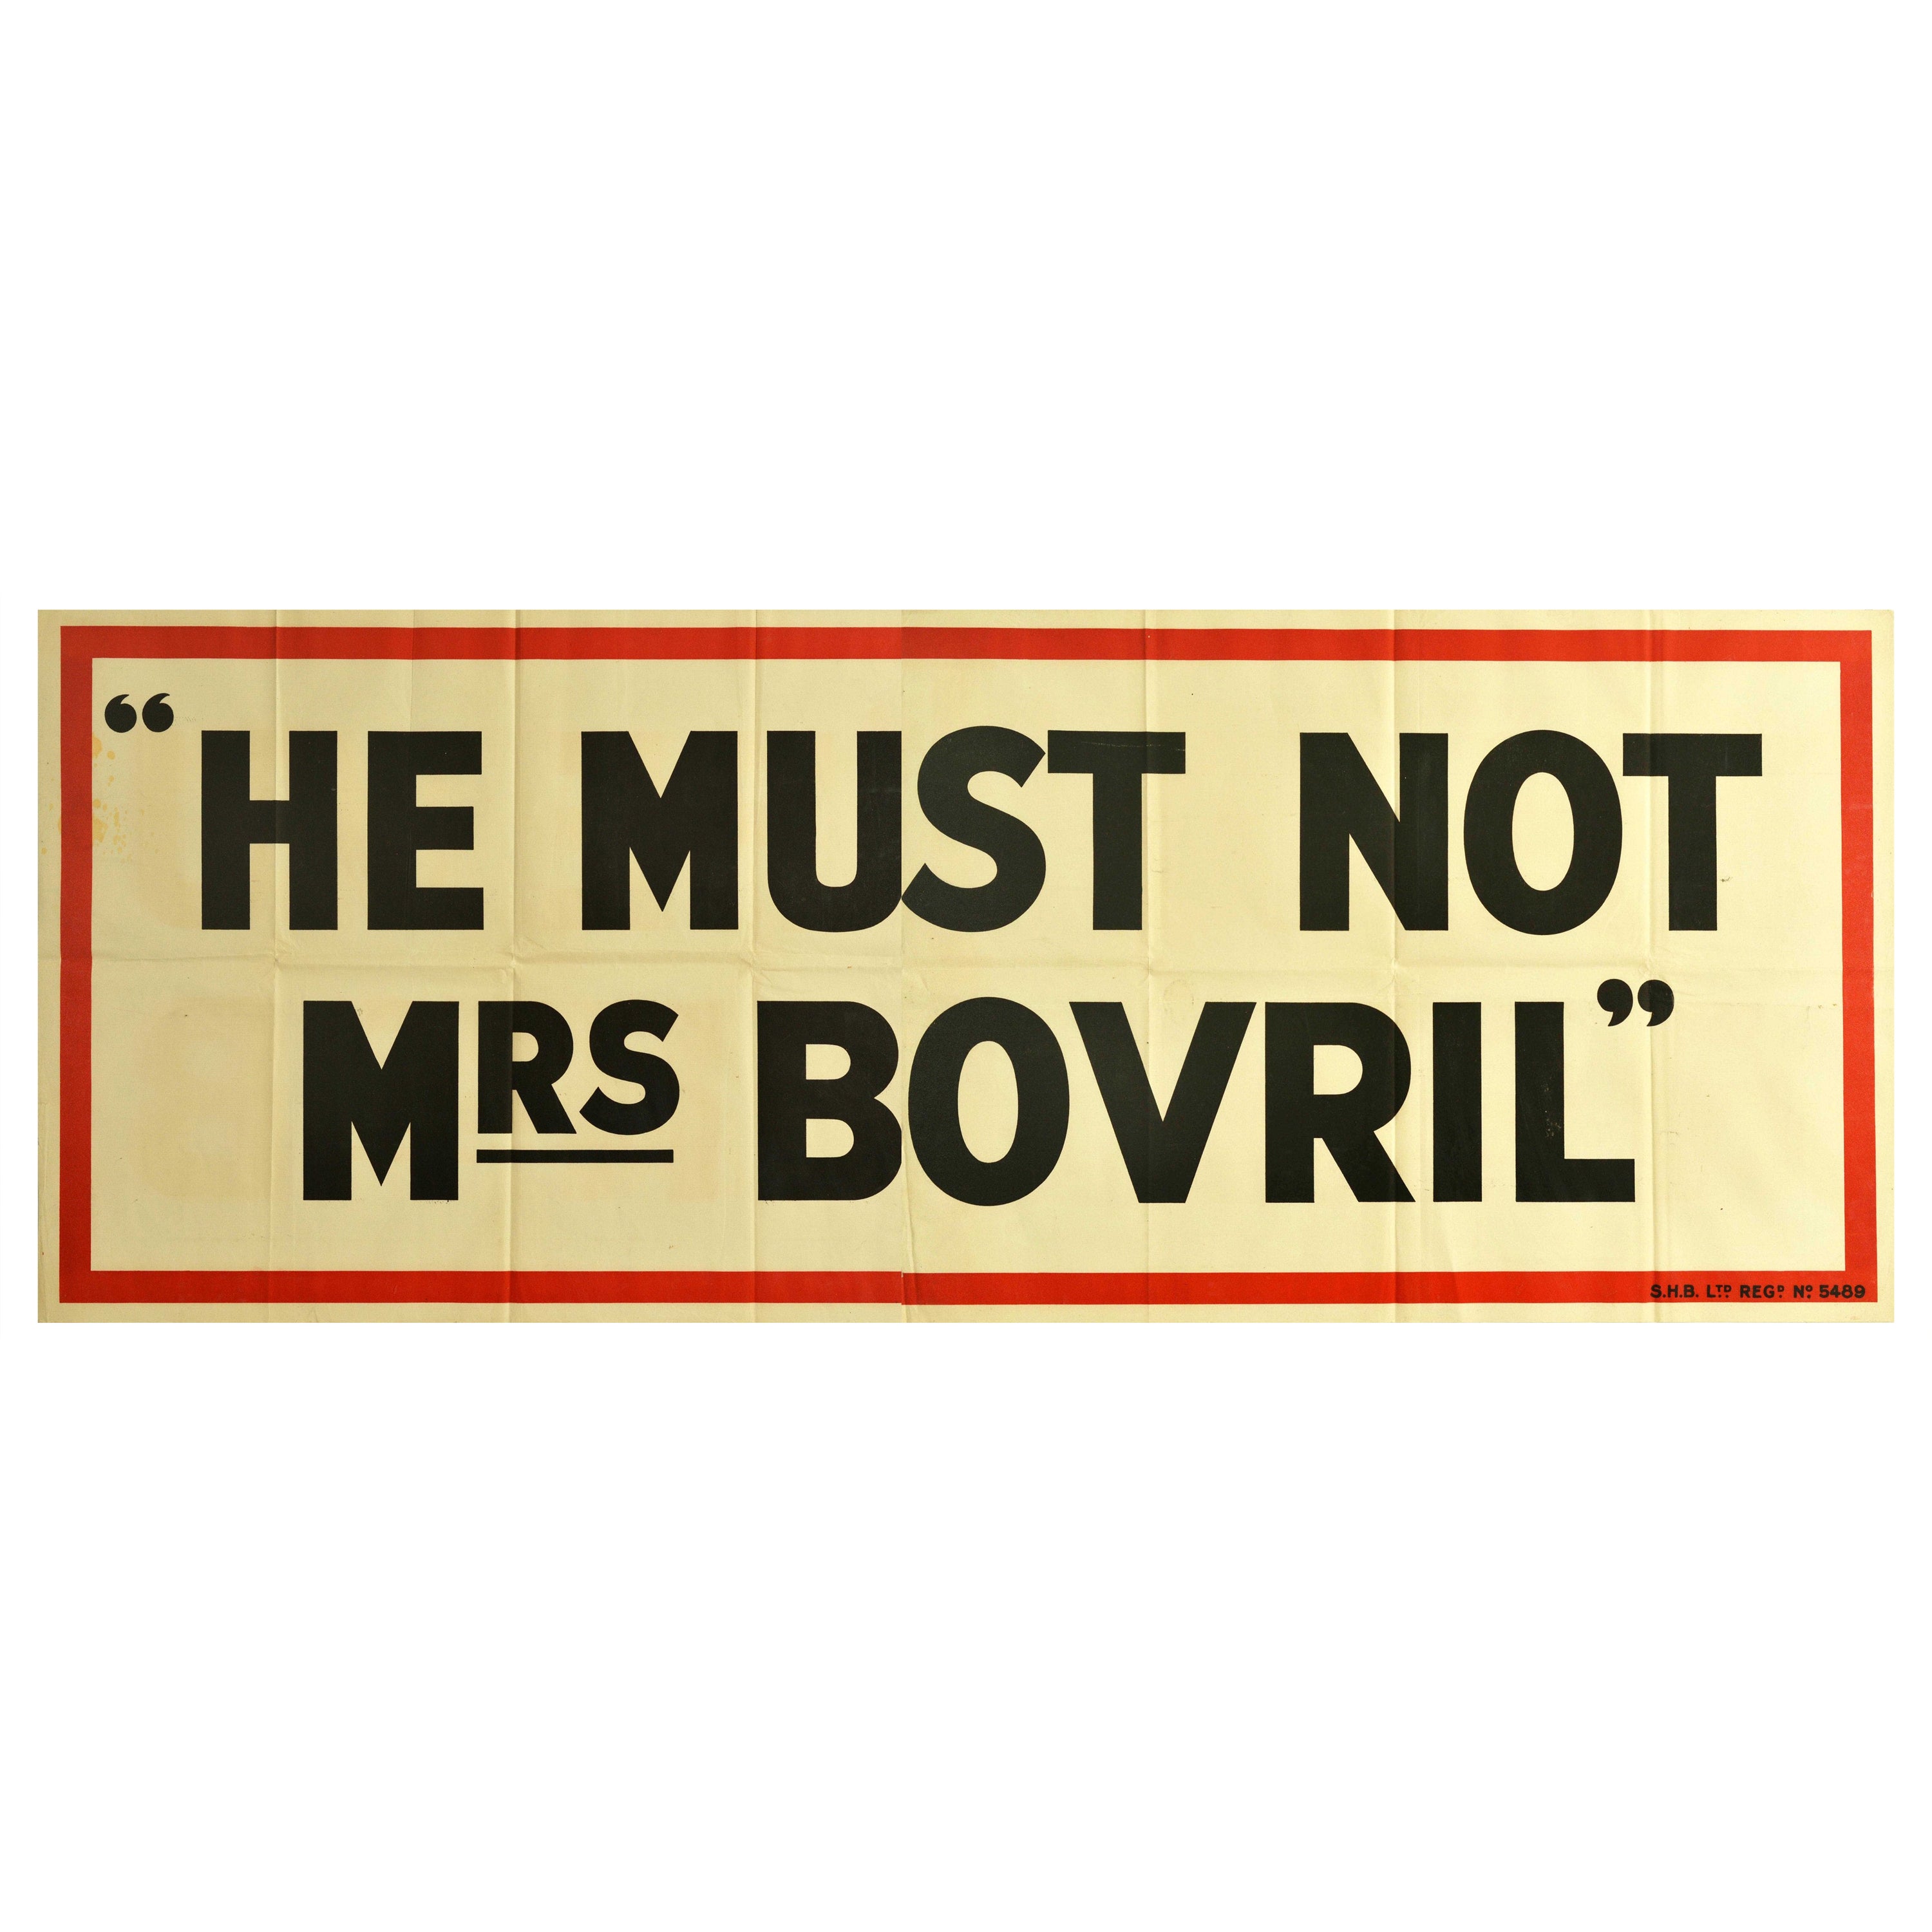 Original Vintage Poster He Must Not Mrs Bovril Word Play Pun Drink Food Campaign For Sale